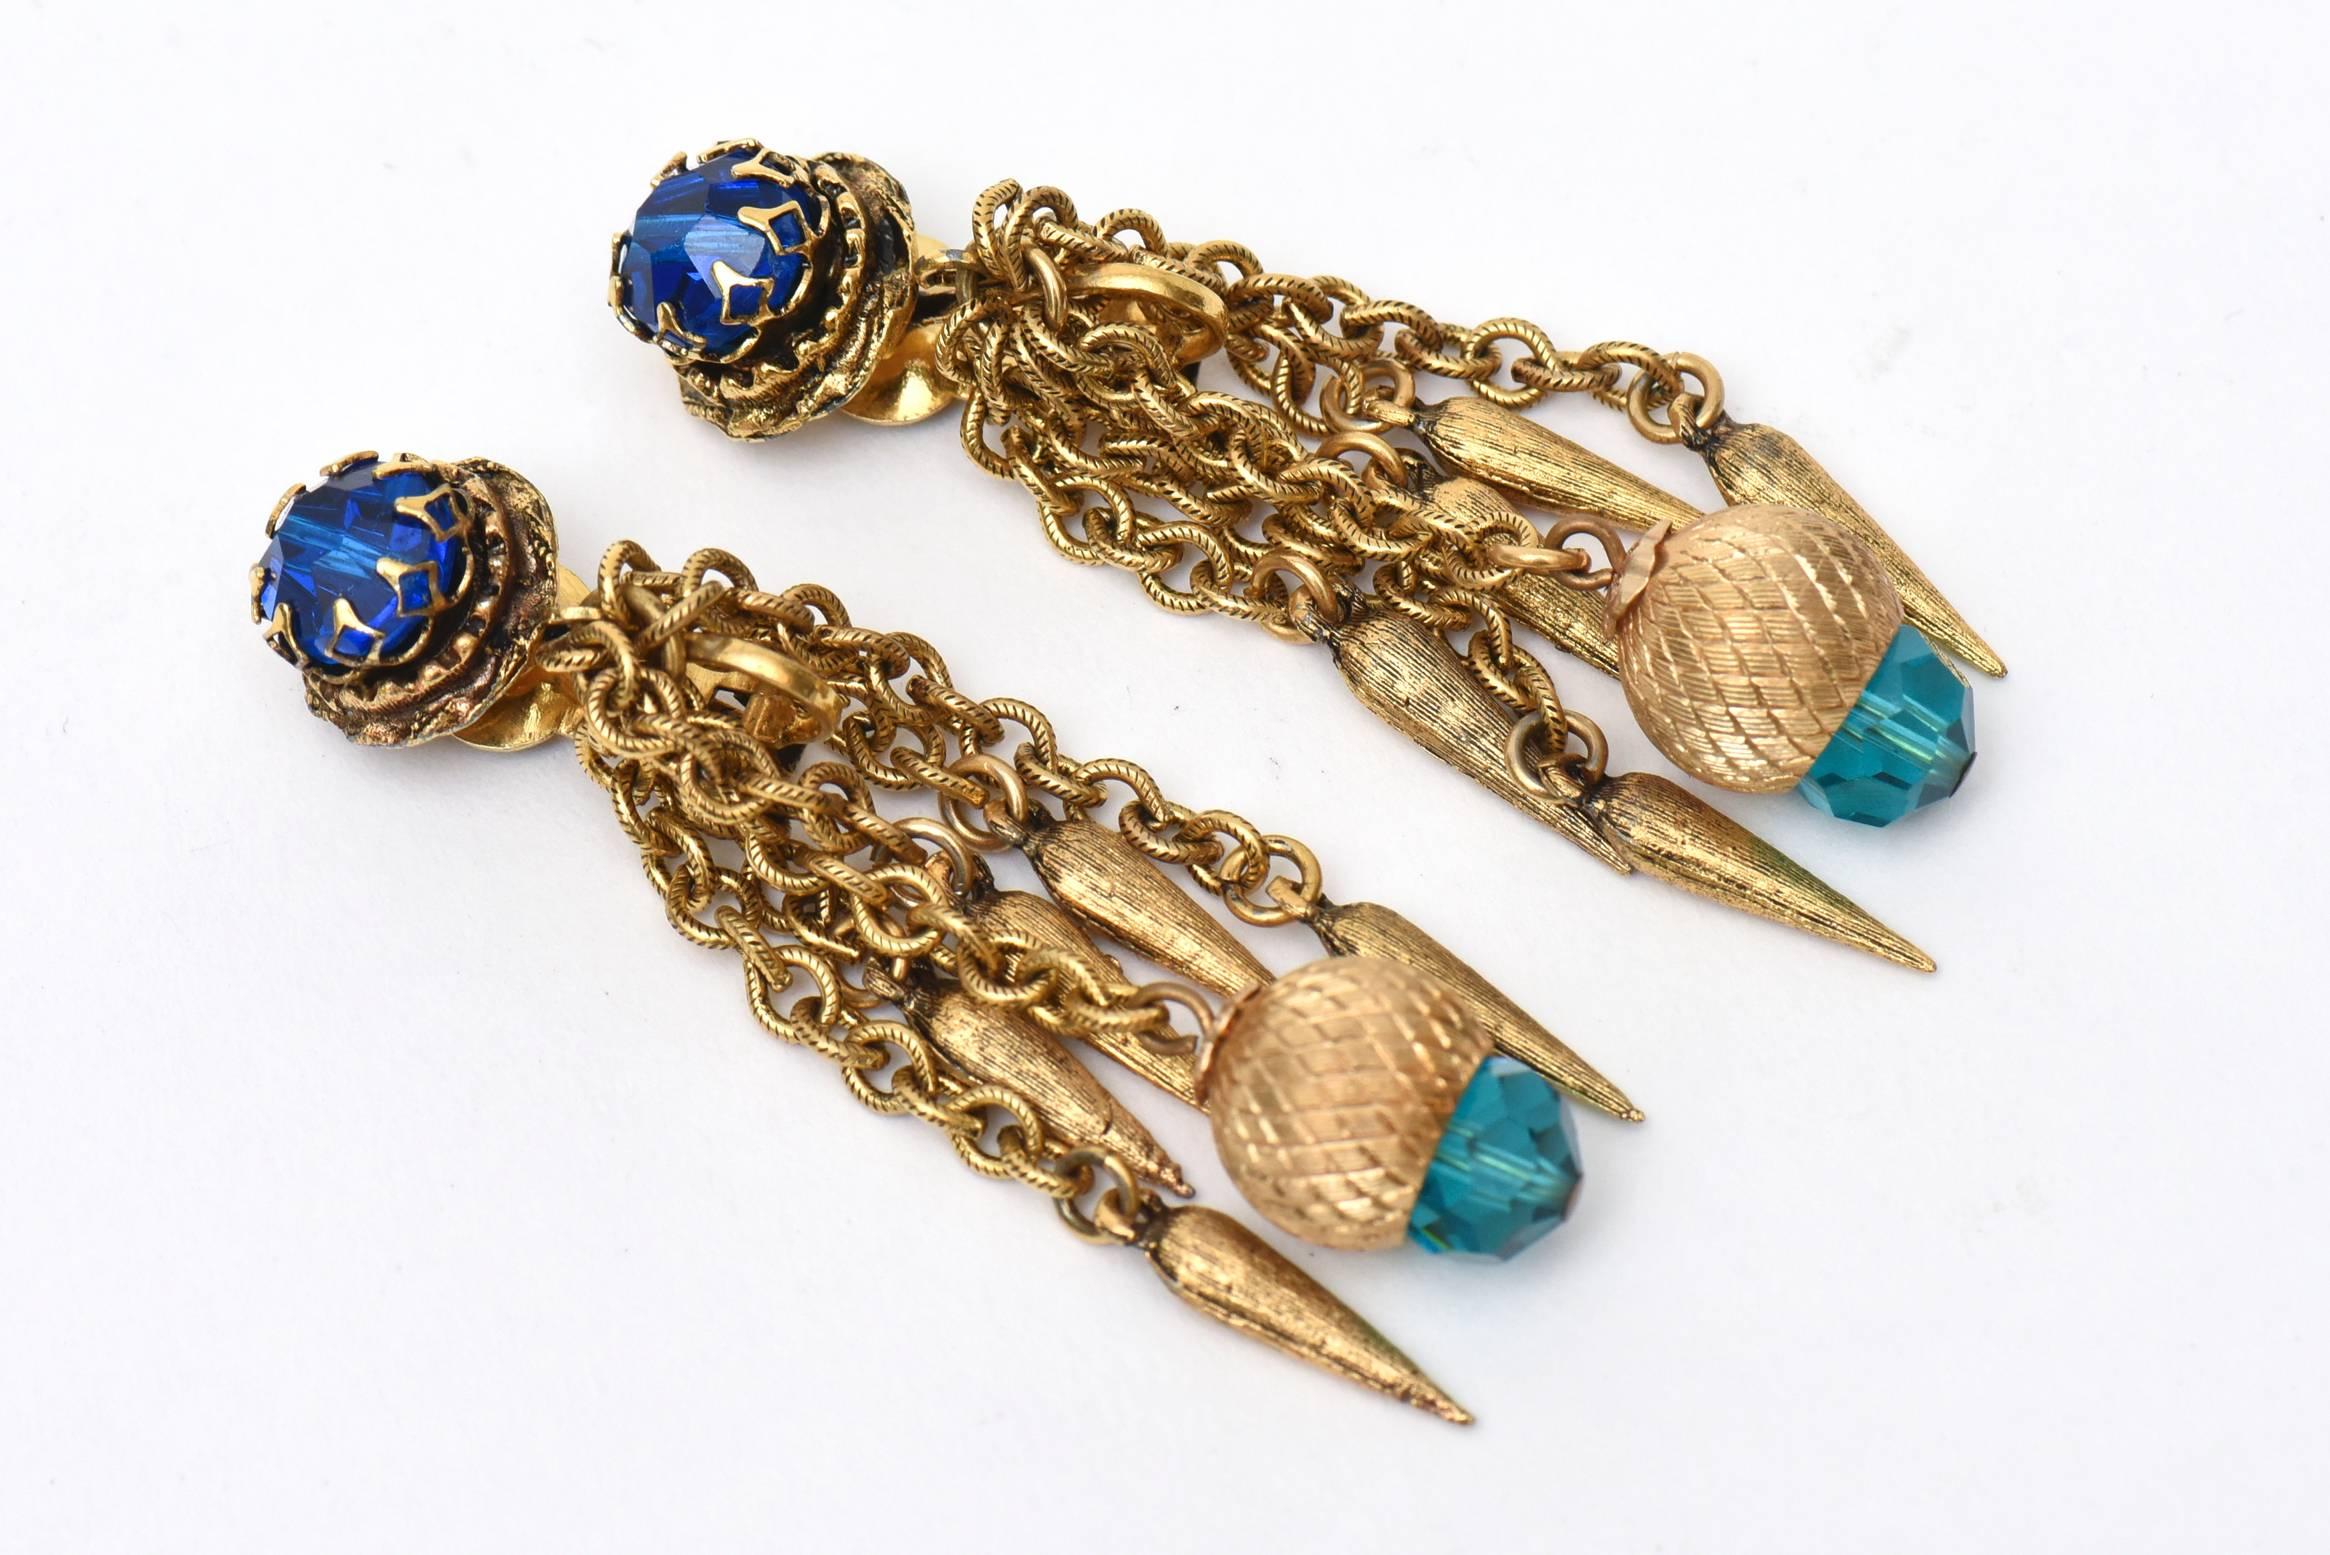 These beautiful vintage long dangle pair of vintage clip on earrings are comprised of turquoise and royal blue faceted crystal stones and chain with danglers on the tips. They look so modern today yet they are from the 60's. Tres Chic and au